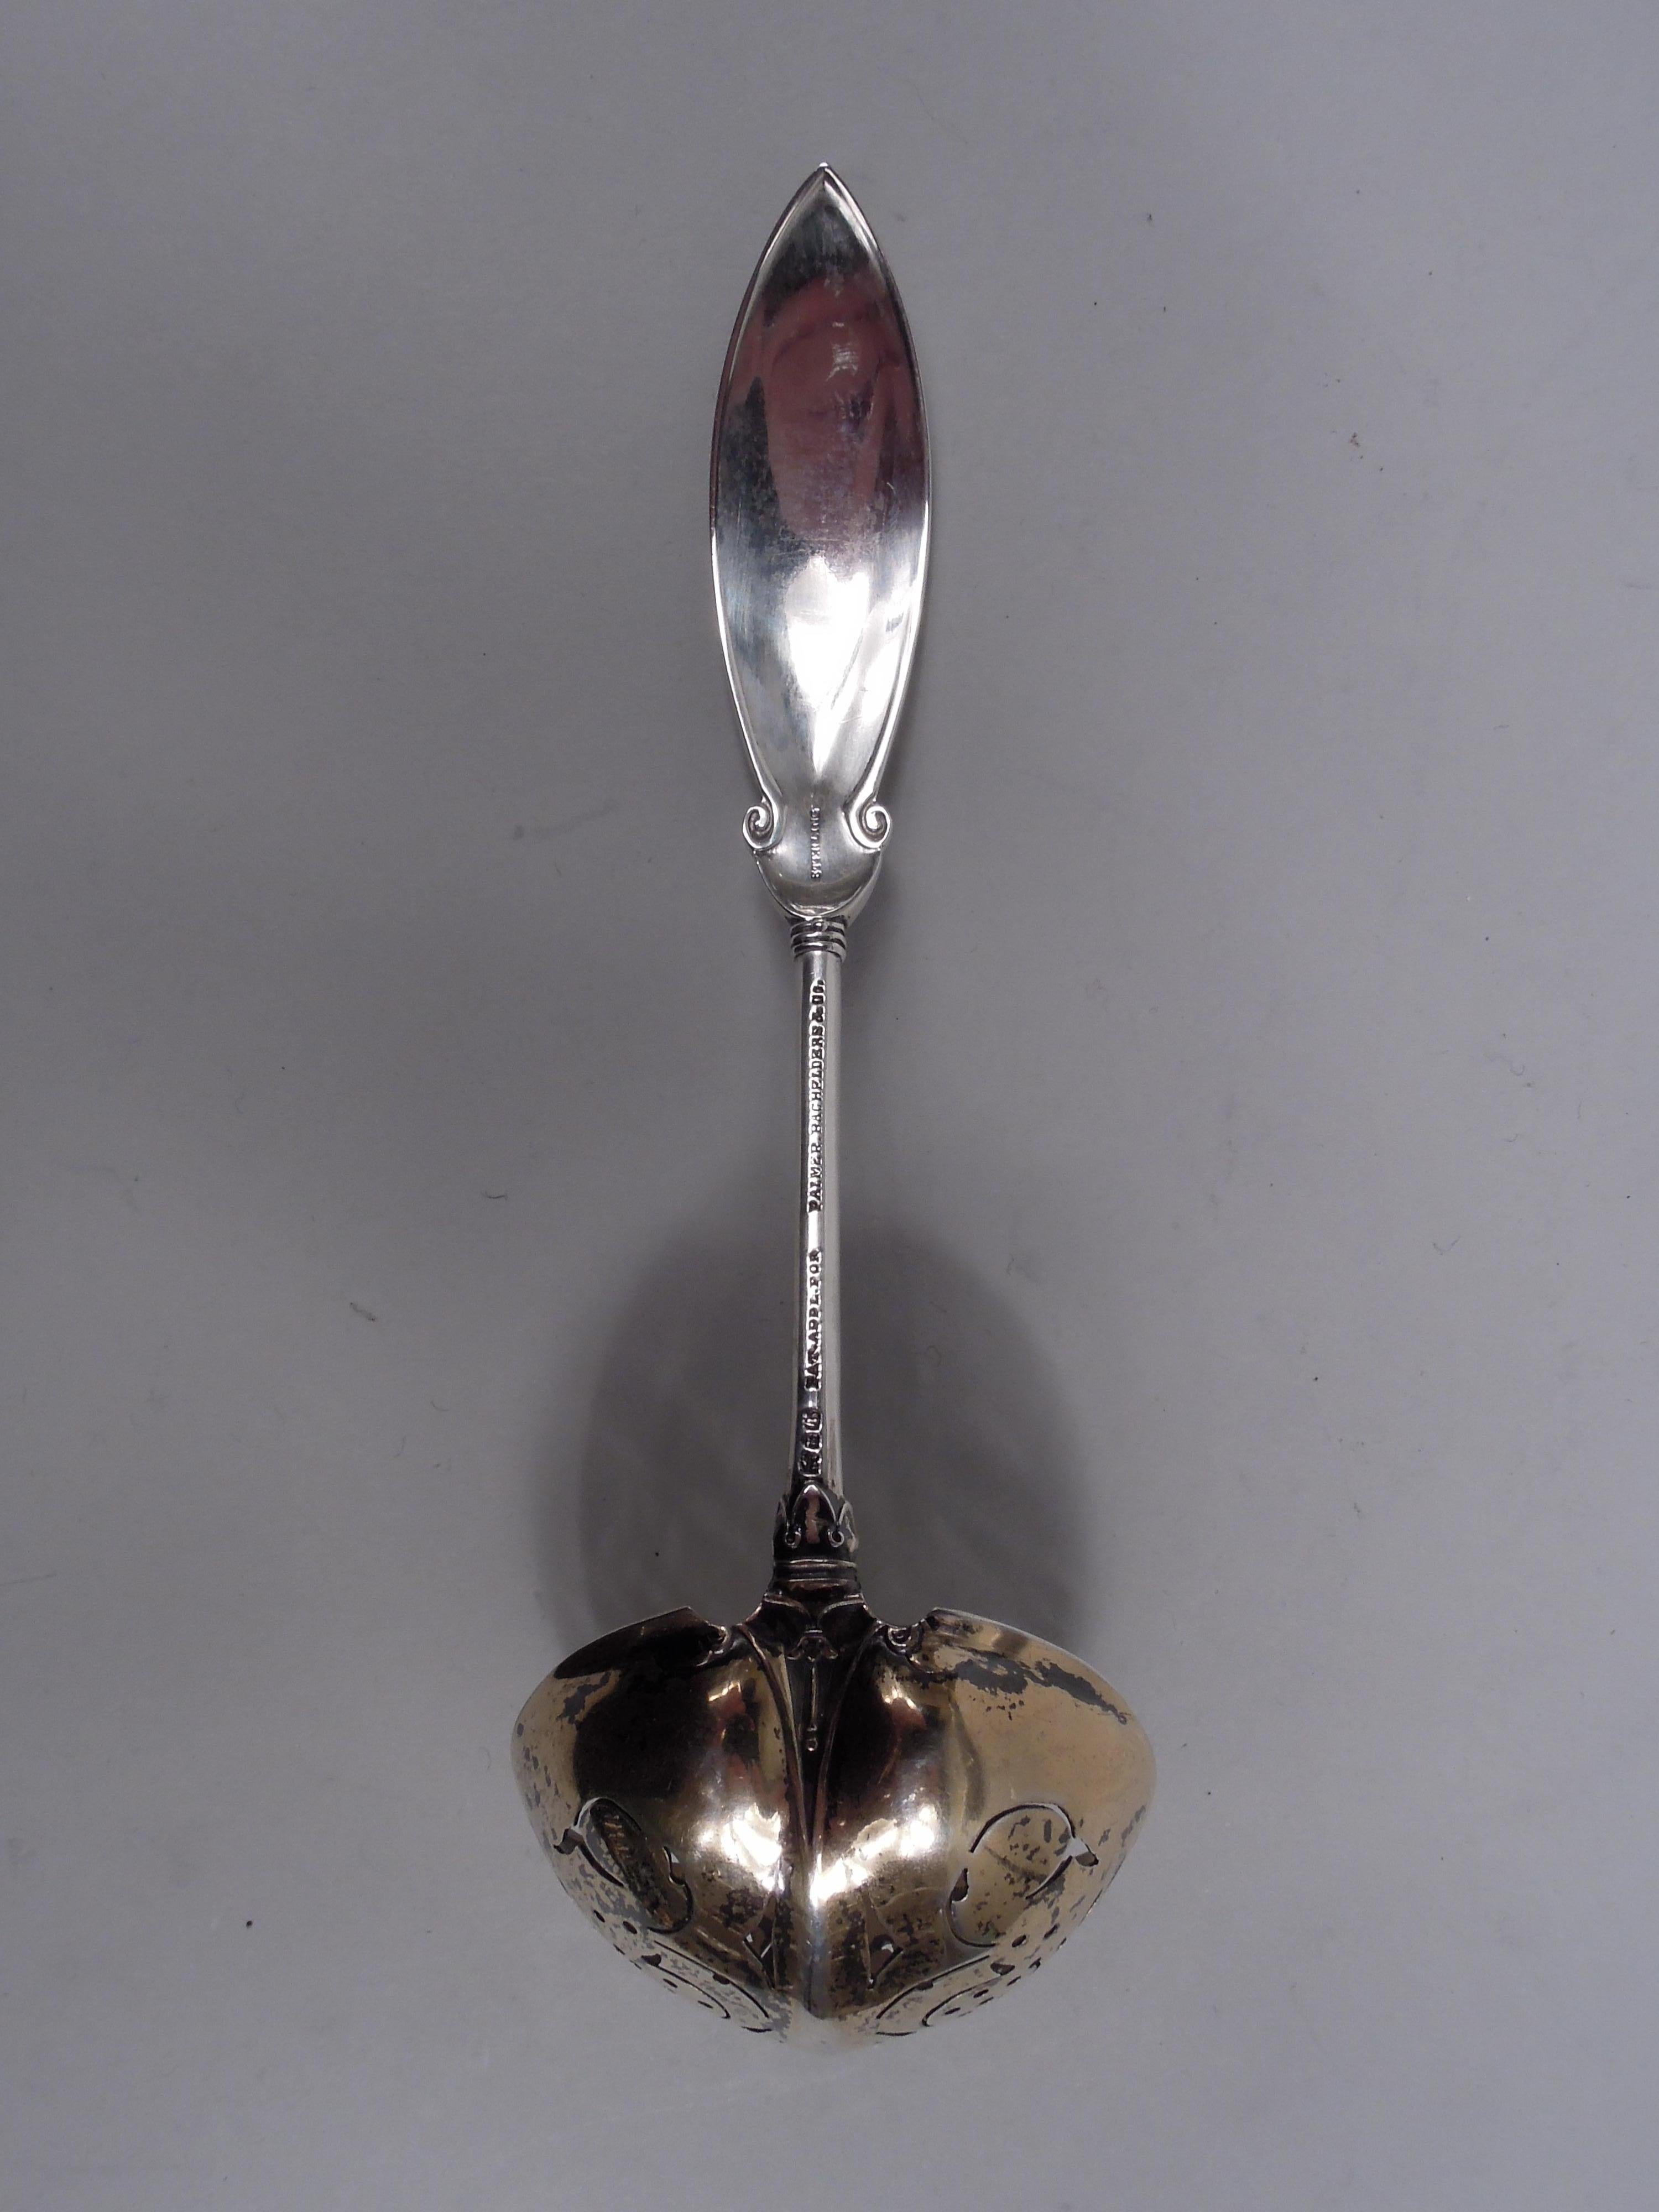 Persian sterling silver pierced ladle. Made by Gorham in Providence, ca 1871. Pointed ovoid terminal with stylized leaf and scroll ornament mounted to round stem with reeded bands set in leaf mount; bowl round and gilt with ornamental piercing and